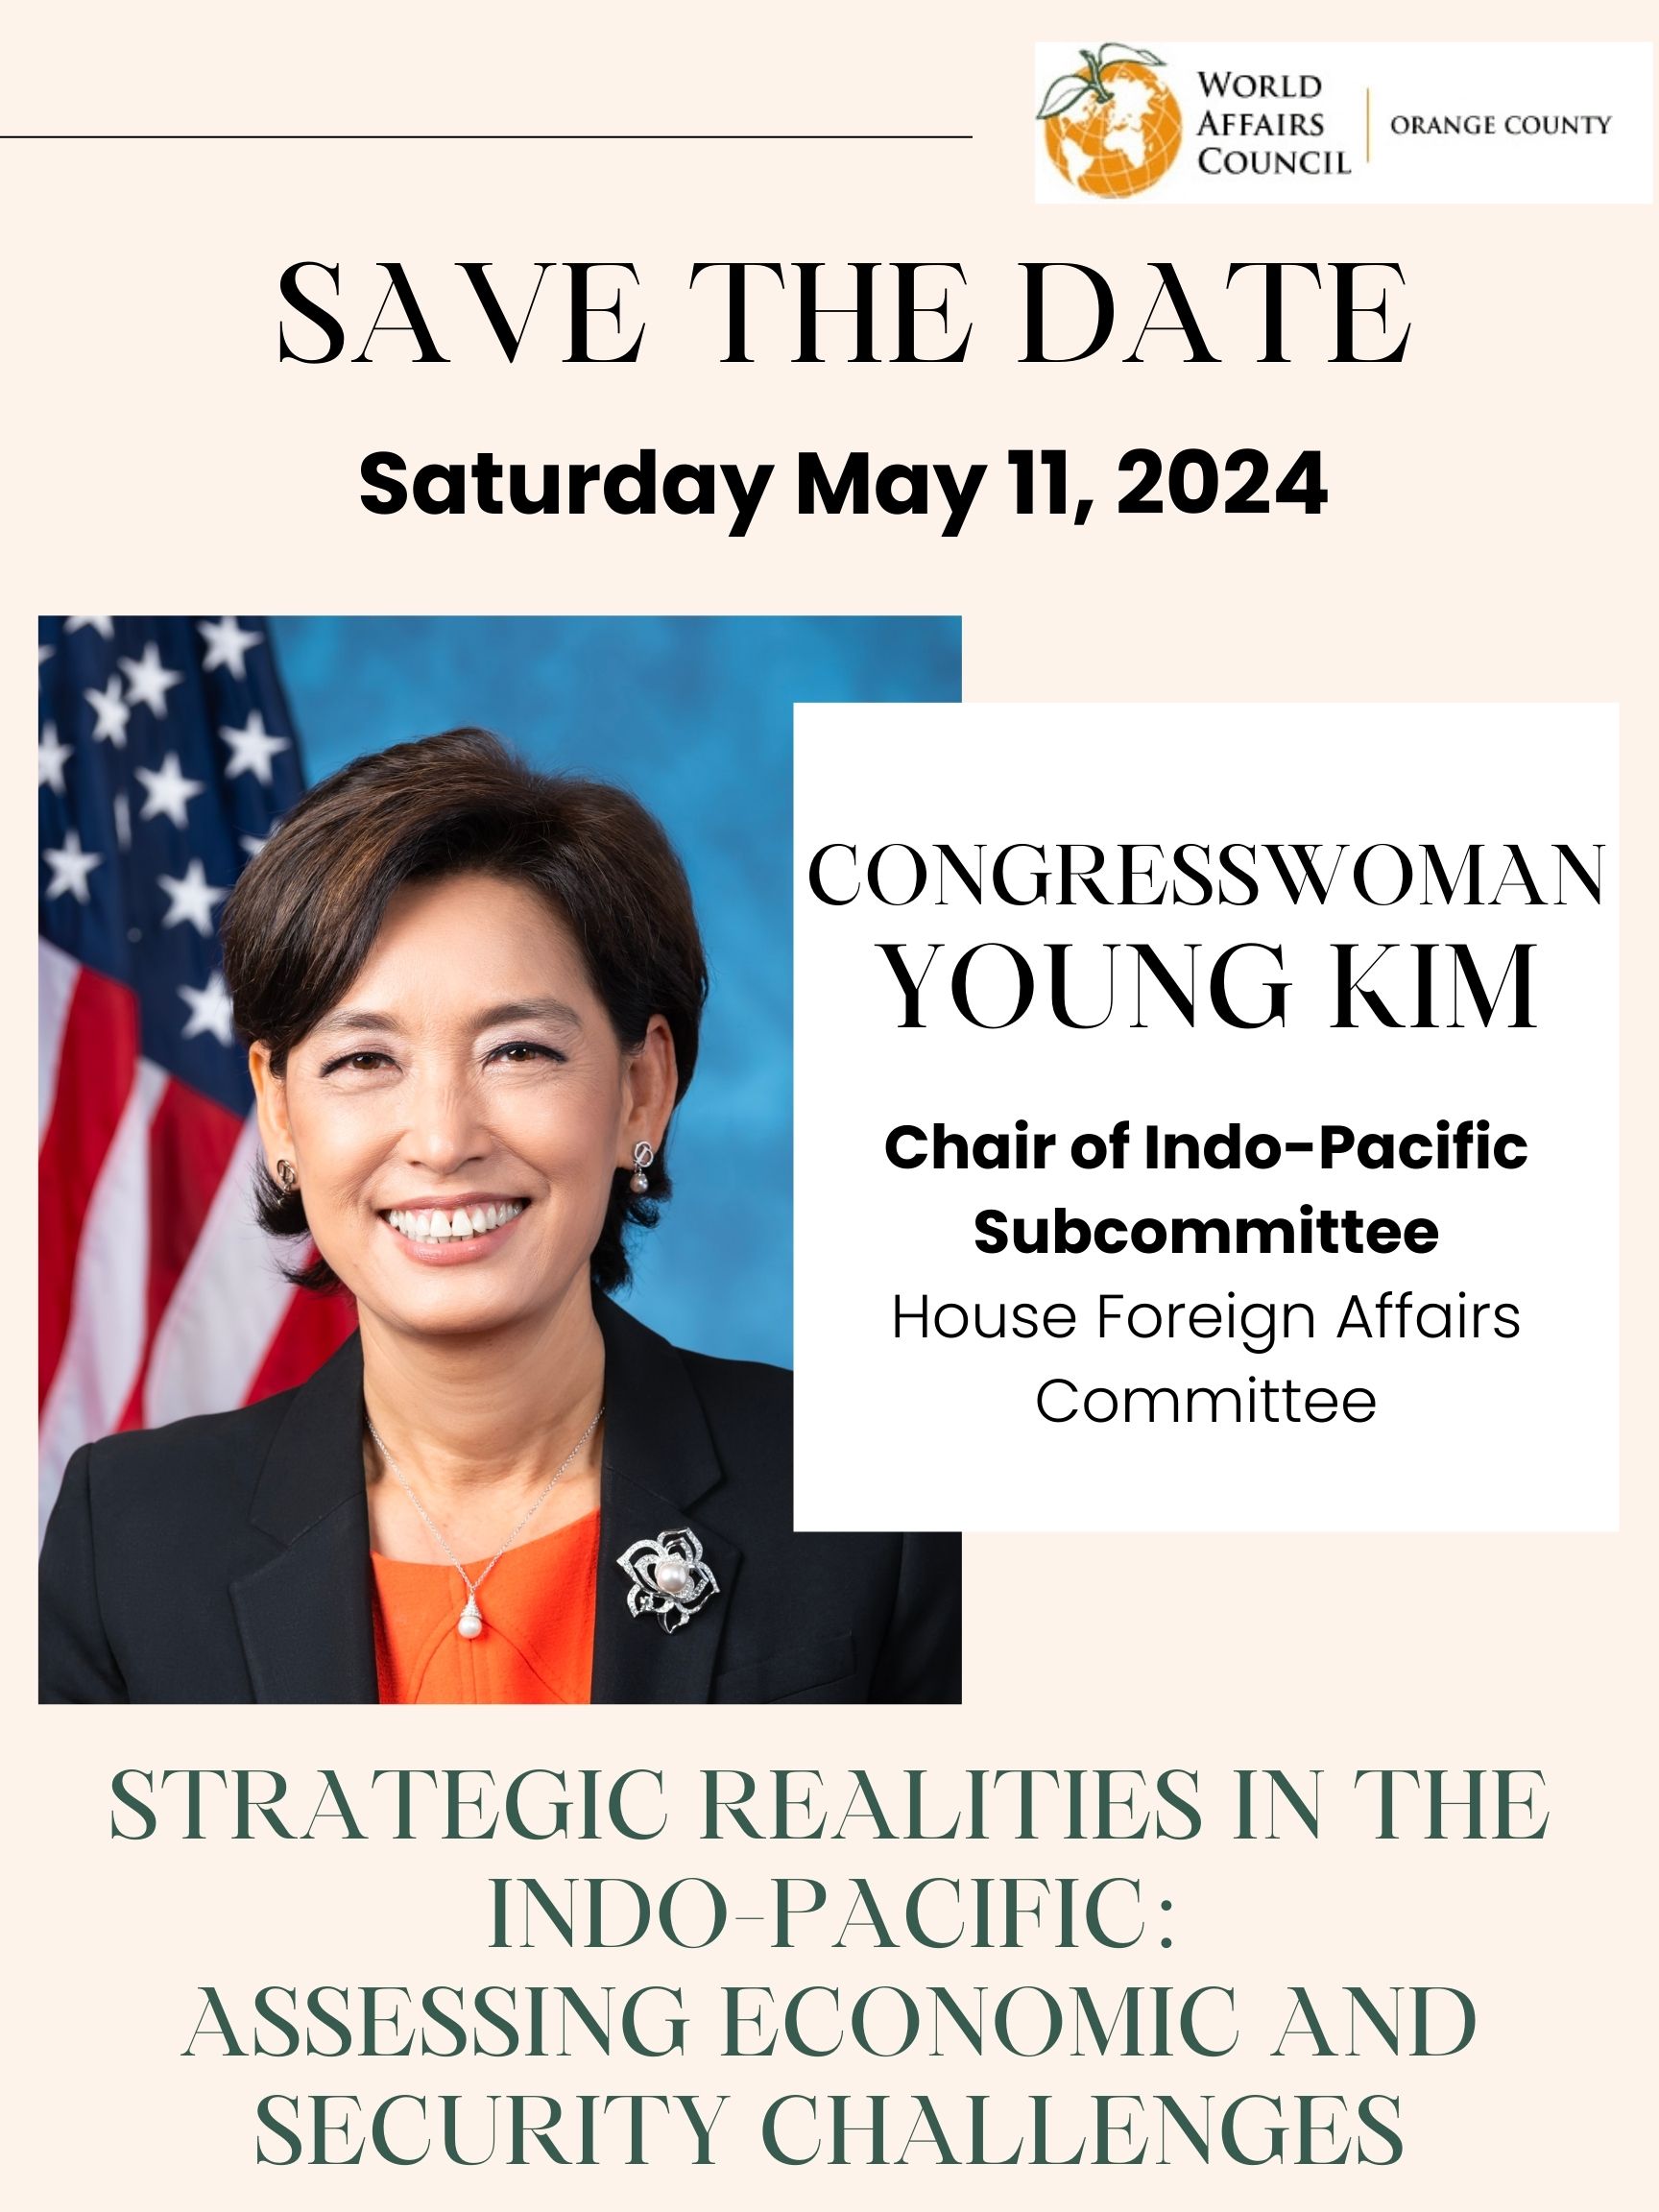 SAVE THE DATE: Congresswoman Young Kim